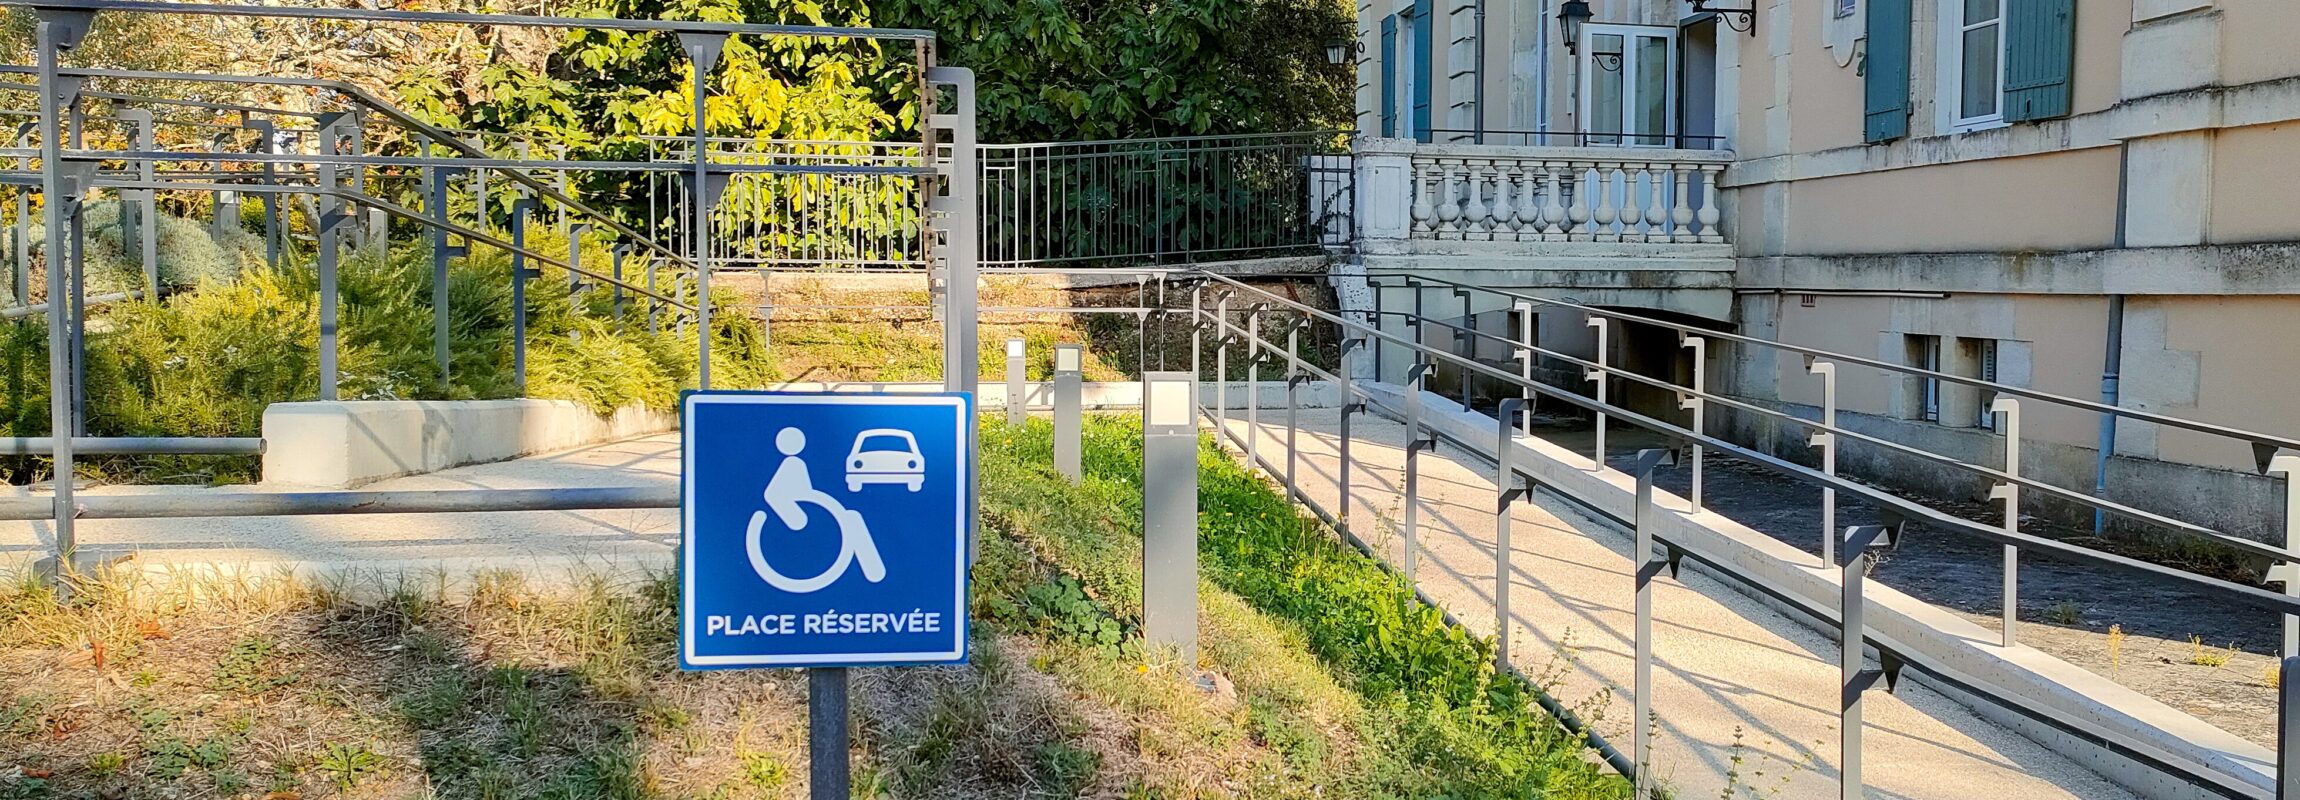 We welcome all guests with a disability